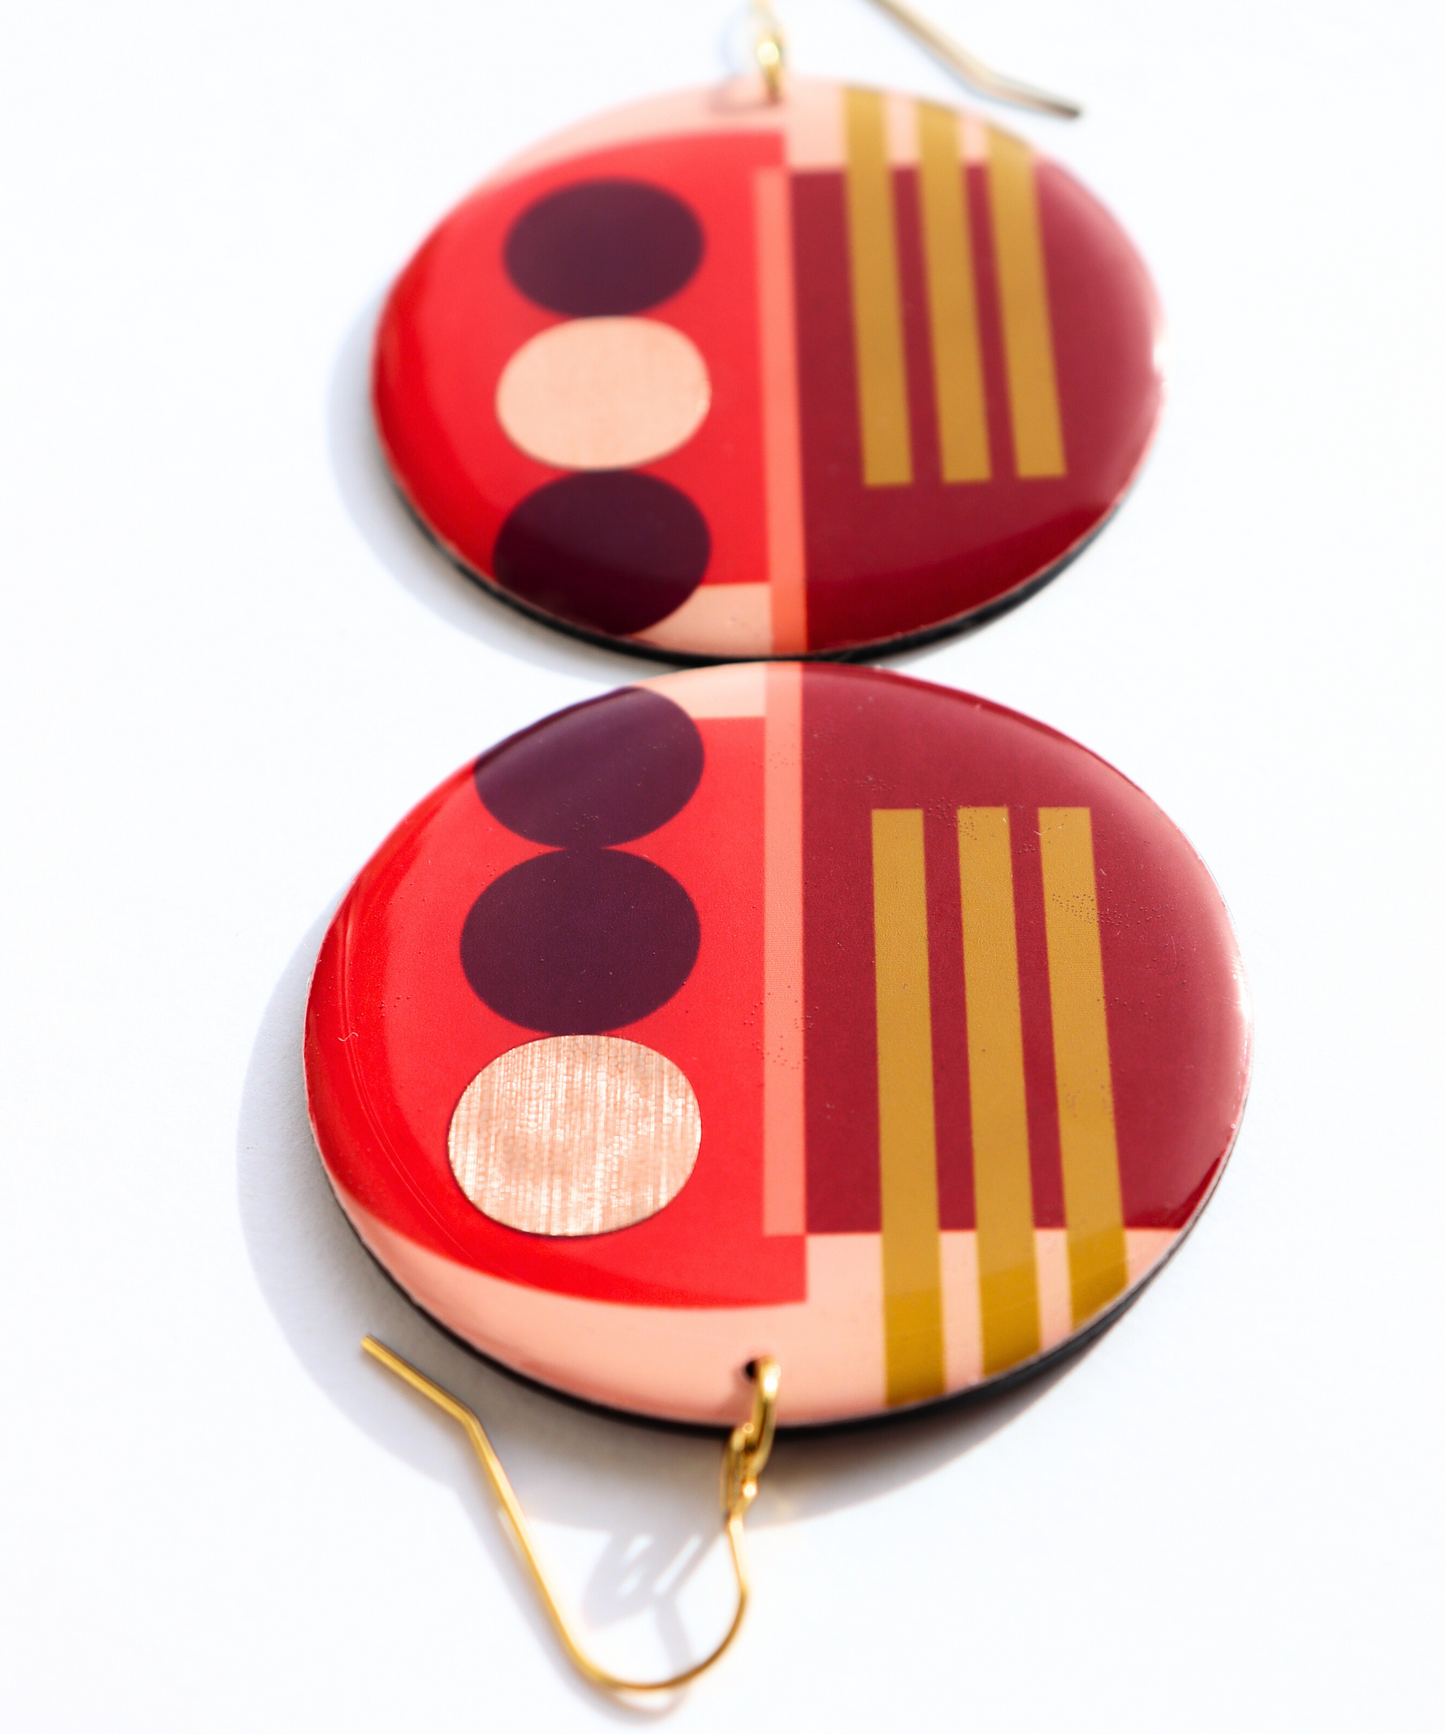 Abstraction on discs / Irish made recycled jewellery (E1)